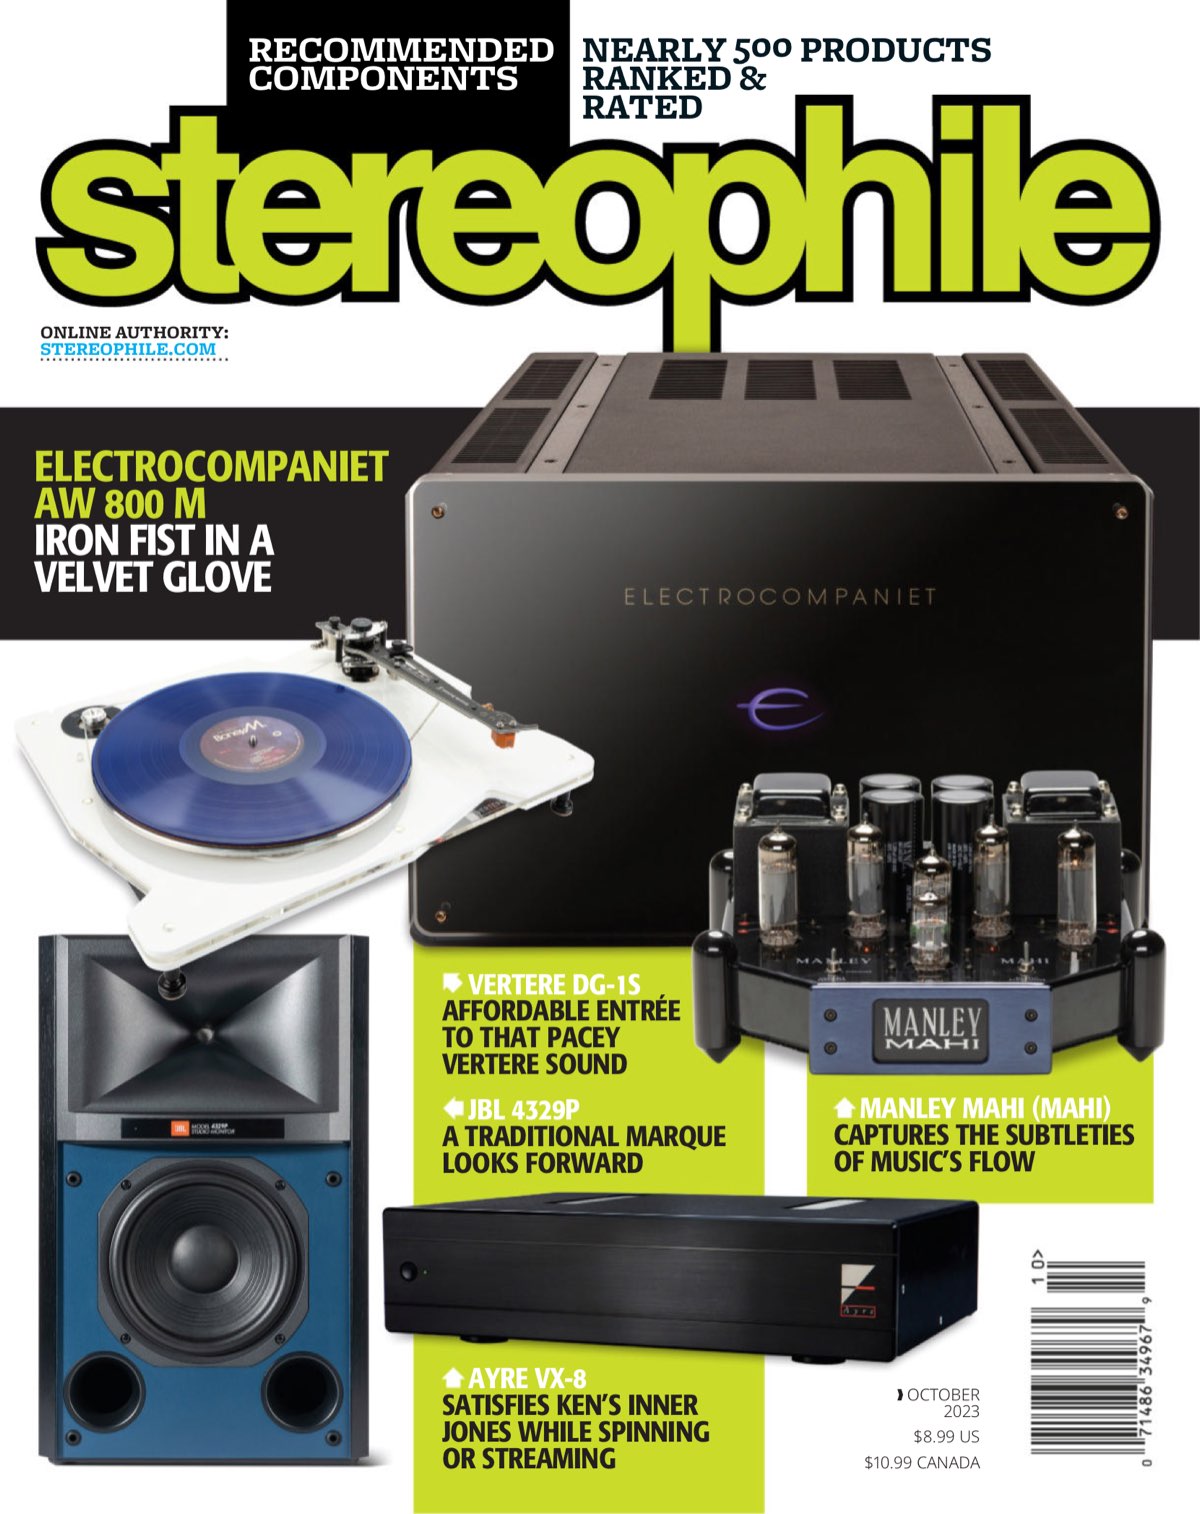 Stereophile - Vol. 46 No. 10 [Oct 2023]